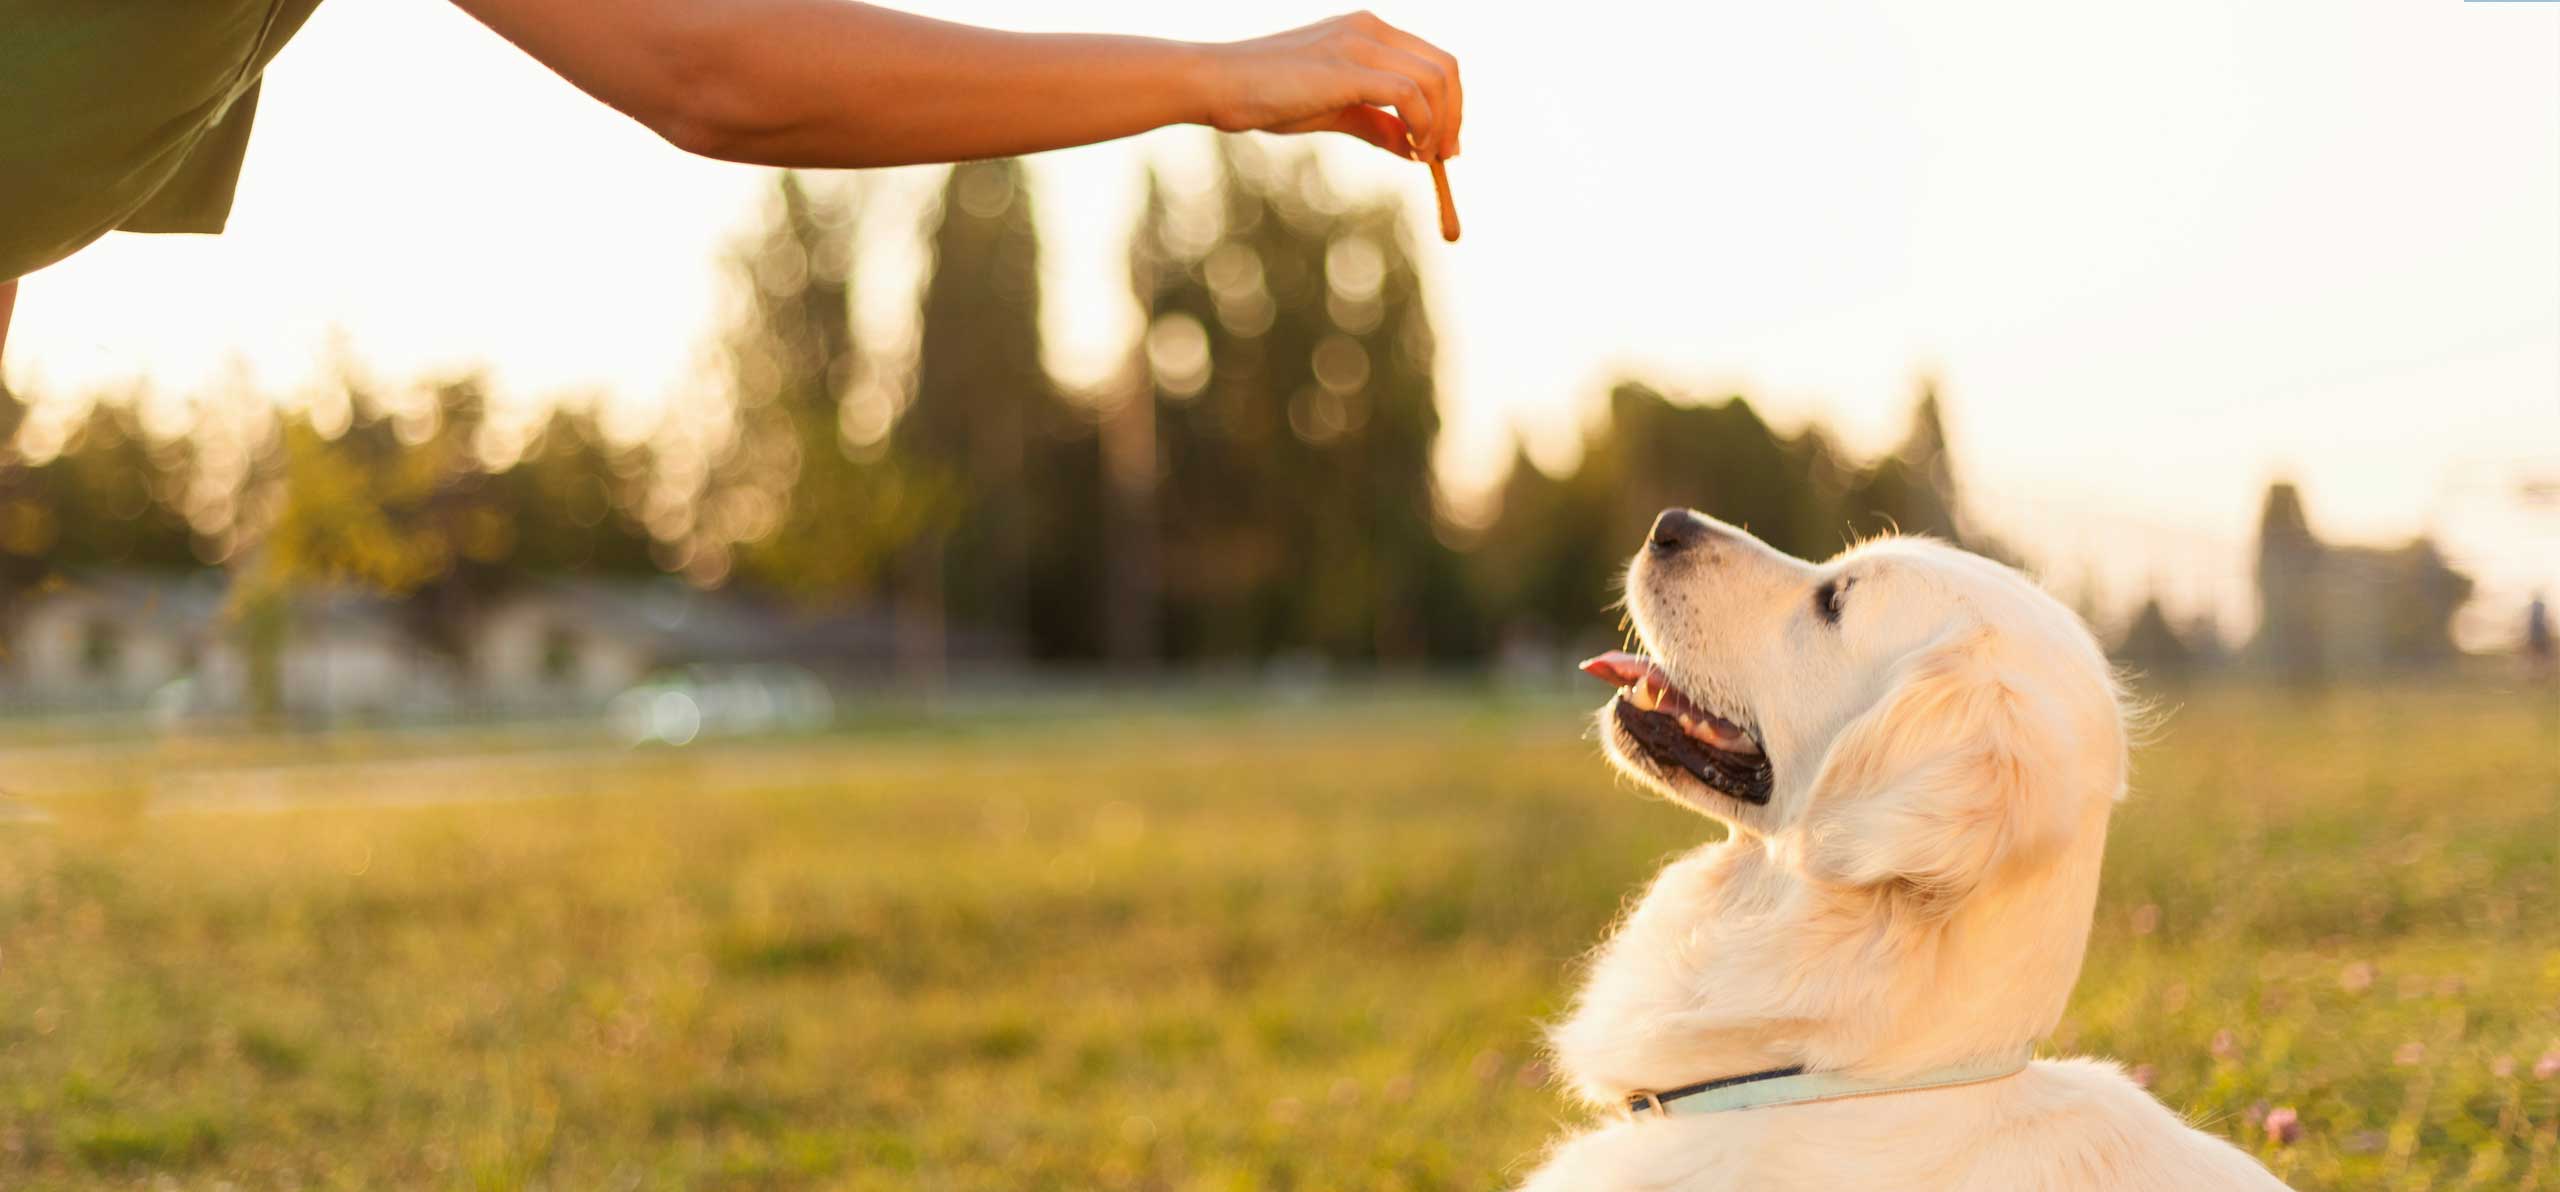 dog smiling at a hand holding a treat